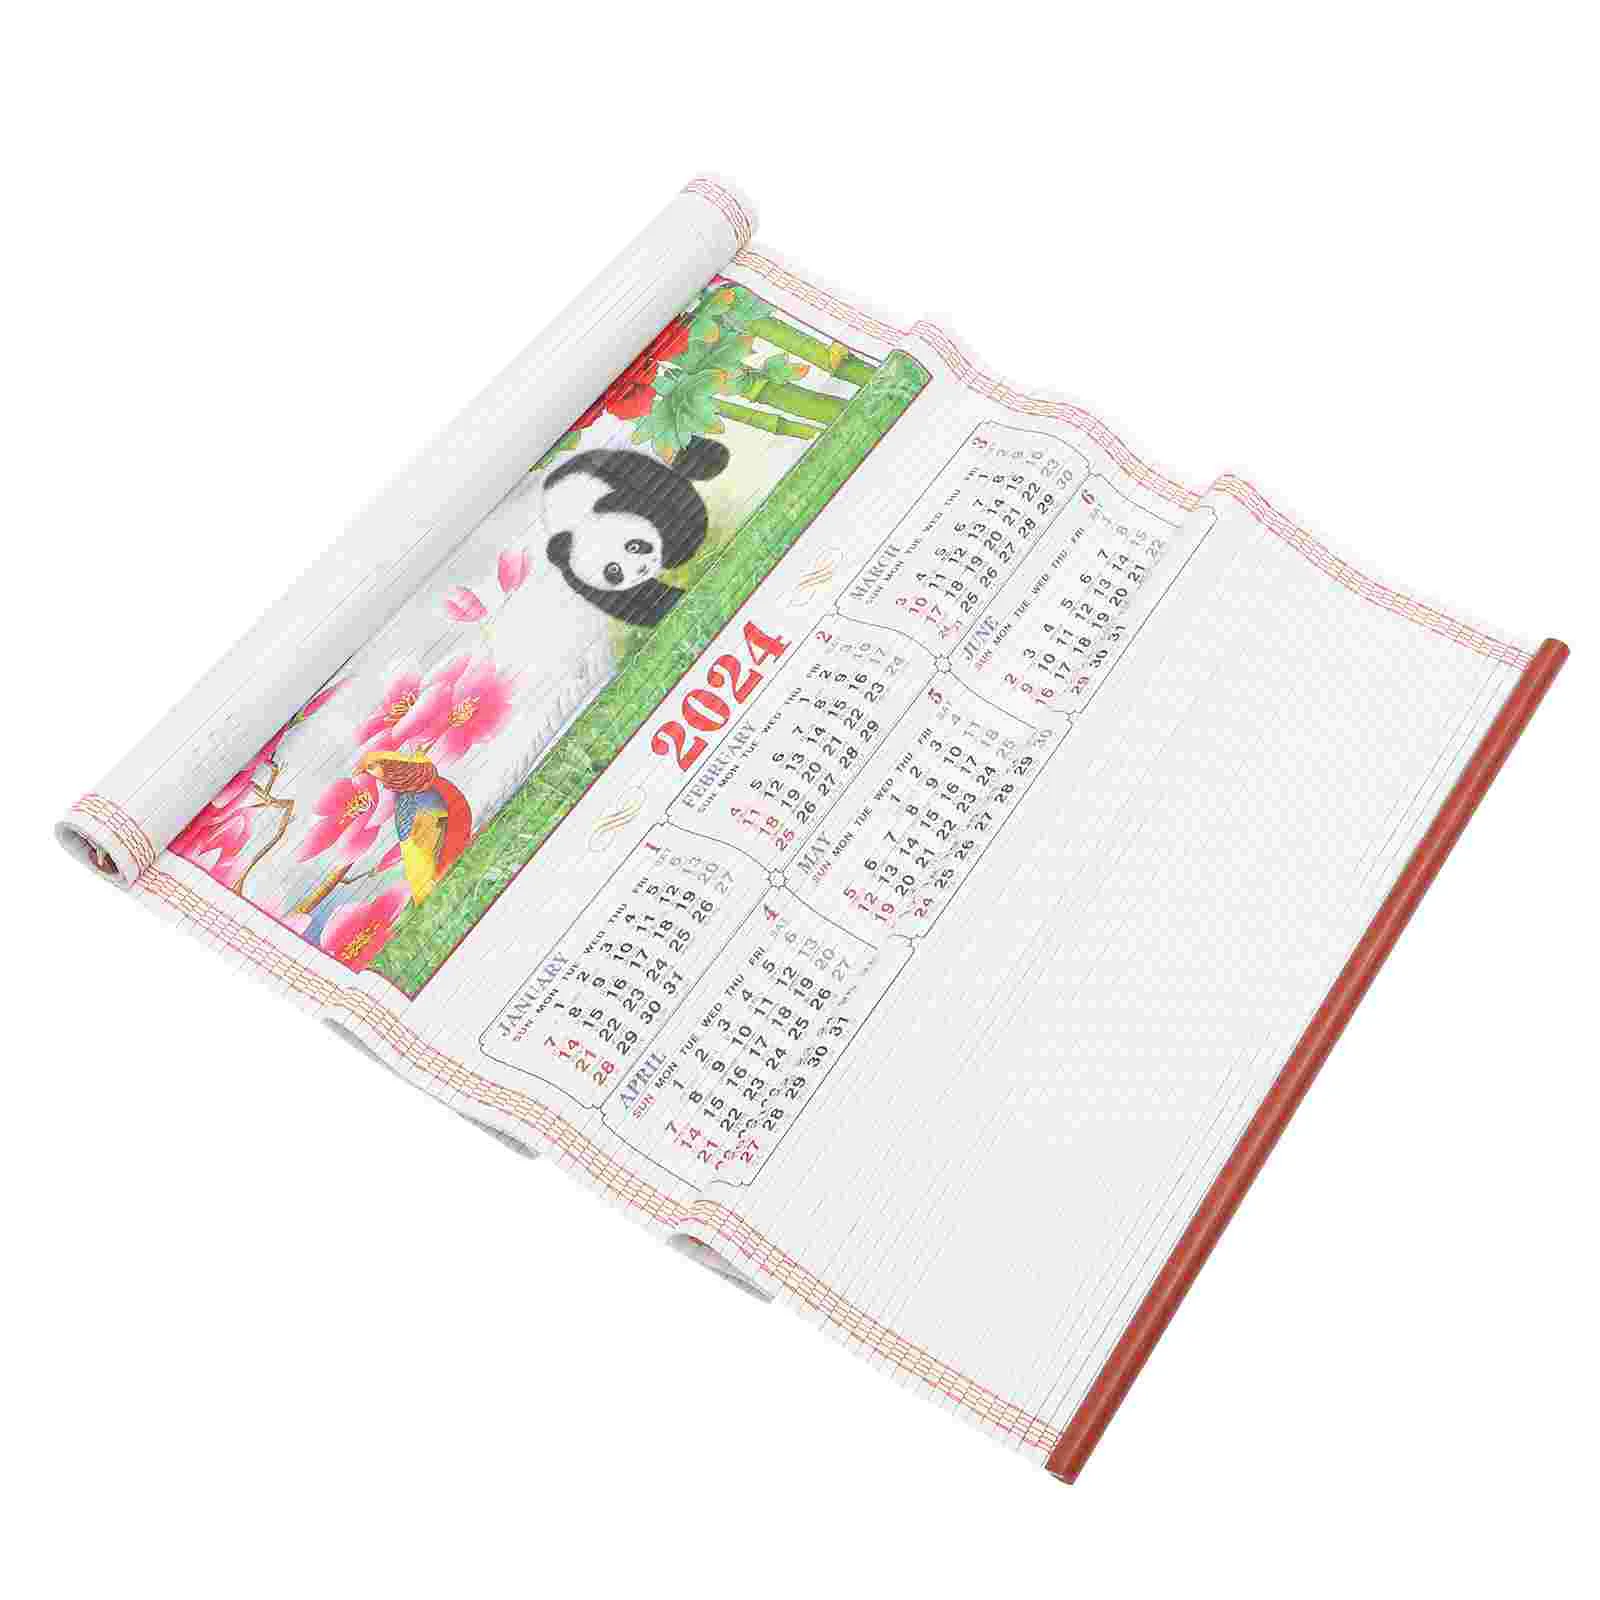 Chinese New Year Wall Hanging Calendars Traditional Scroll Lunar Calendar Ornament Year Of Dragon Home Decoration